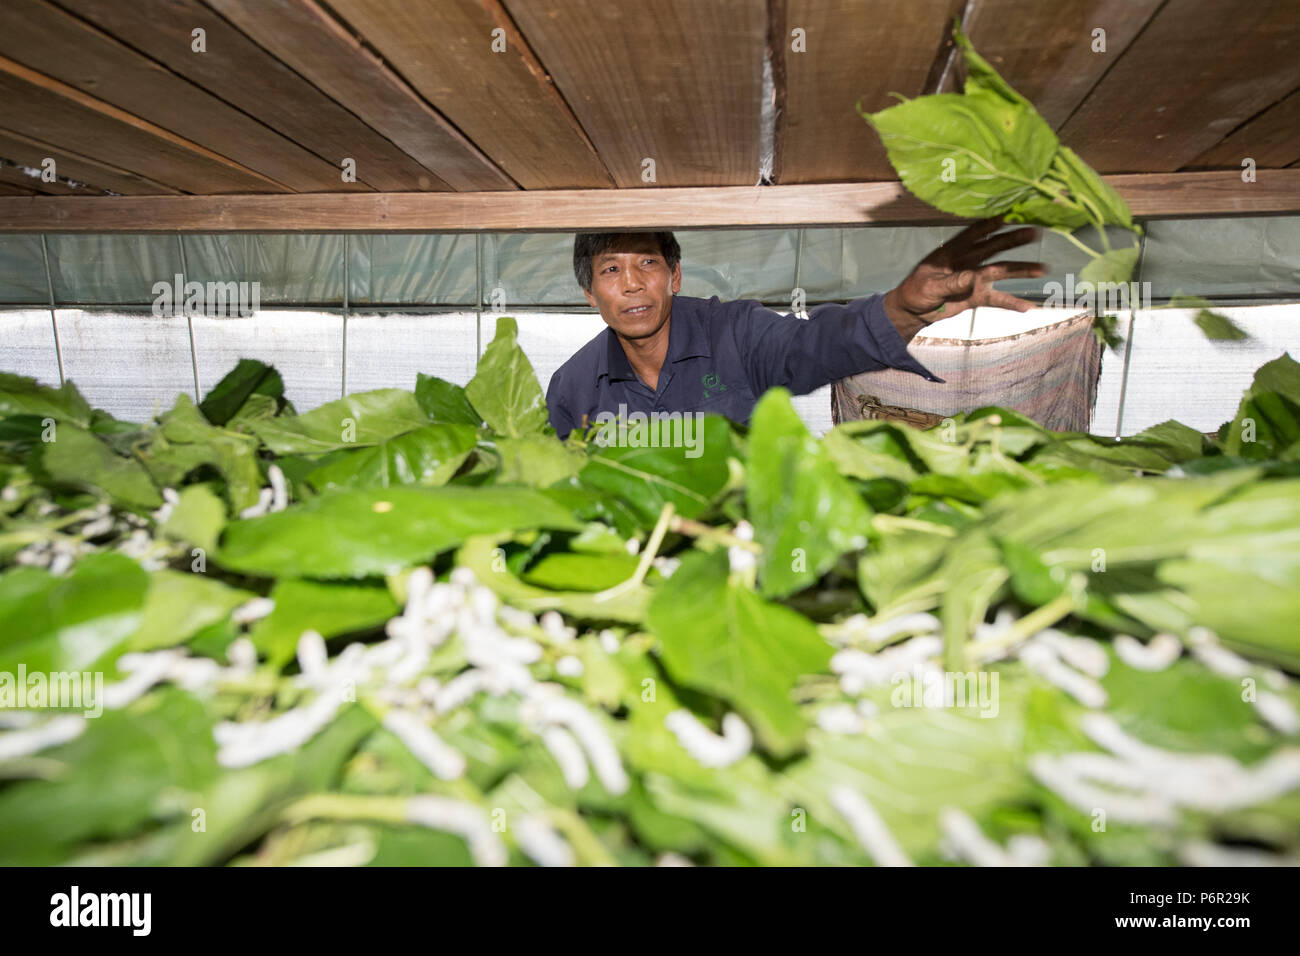 (180702) -- CHUN'AN, July 2, 2018 (Xinhua) -- Workers feed silkworms with mulberry leaves at a silkworm breeding base of Cathaya Group in Wangcun Village of Chun'an County, east China's Zhejiang Province, May 9, 2018. Chun'an County cooperated with Cathaya Group in building silkworm breeding bases to produce high quality cocoon and silk products. To date, about 4,000 hectares mulberry bushes have been cultivated and some 300 tonnes raw silk are produced per year. (Xinhua/Weng Xinyang)(wsw) Stock Photo